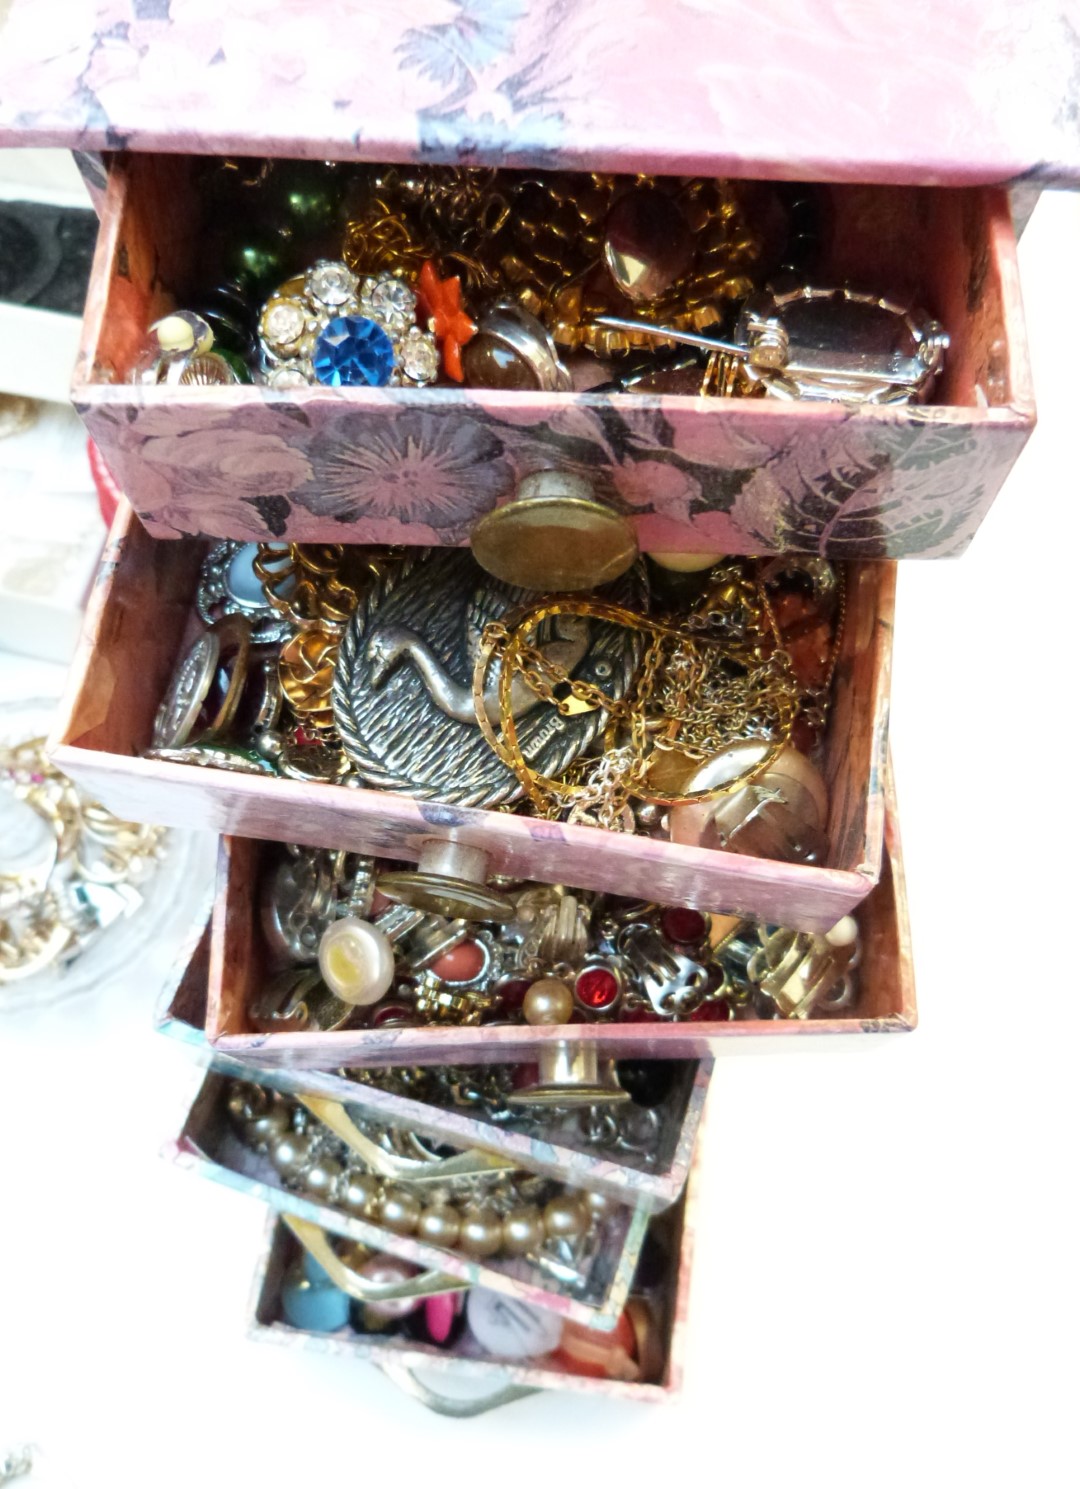 A collection of jewellery including vintage brooches, vintage earrings, beads, necklaces, etc - Image 3 of 11